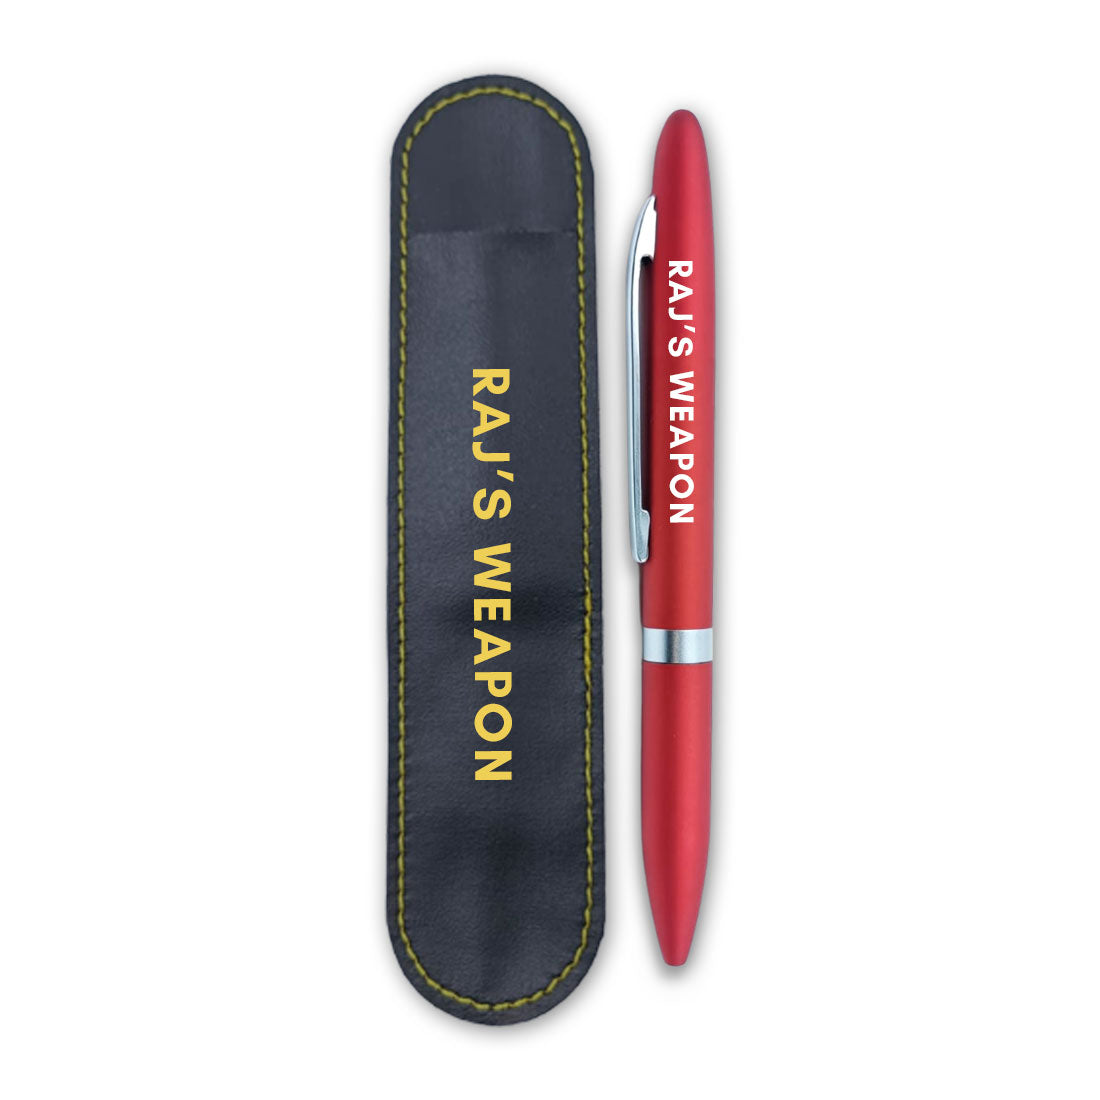 Engraved Personalised Pen Gift Set For Boss Office Colleagues (Red) - Add Name